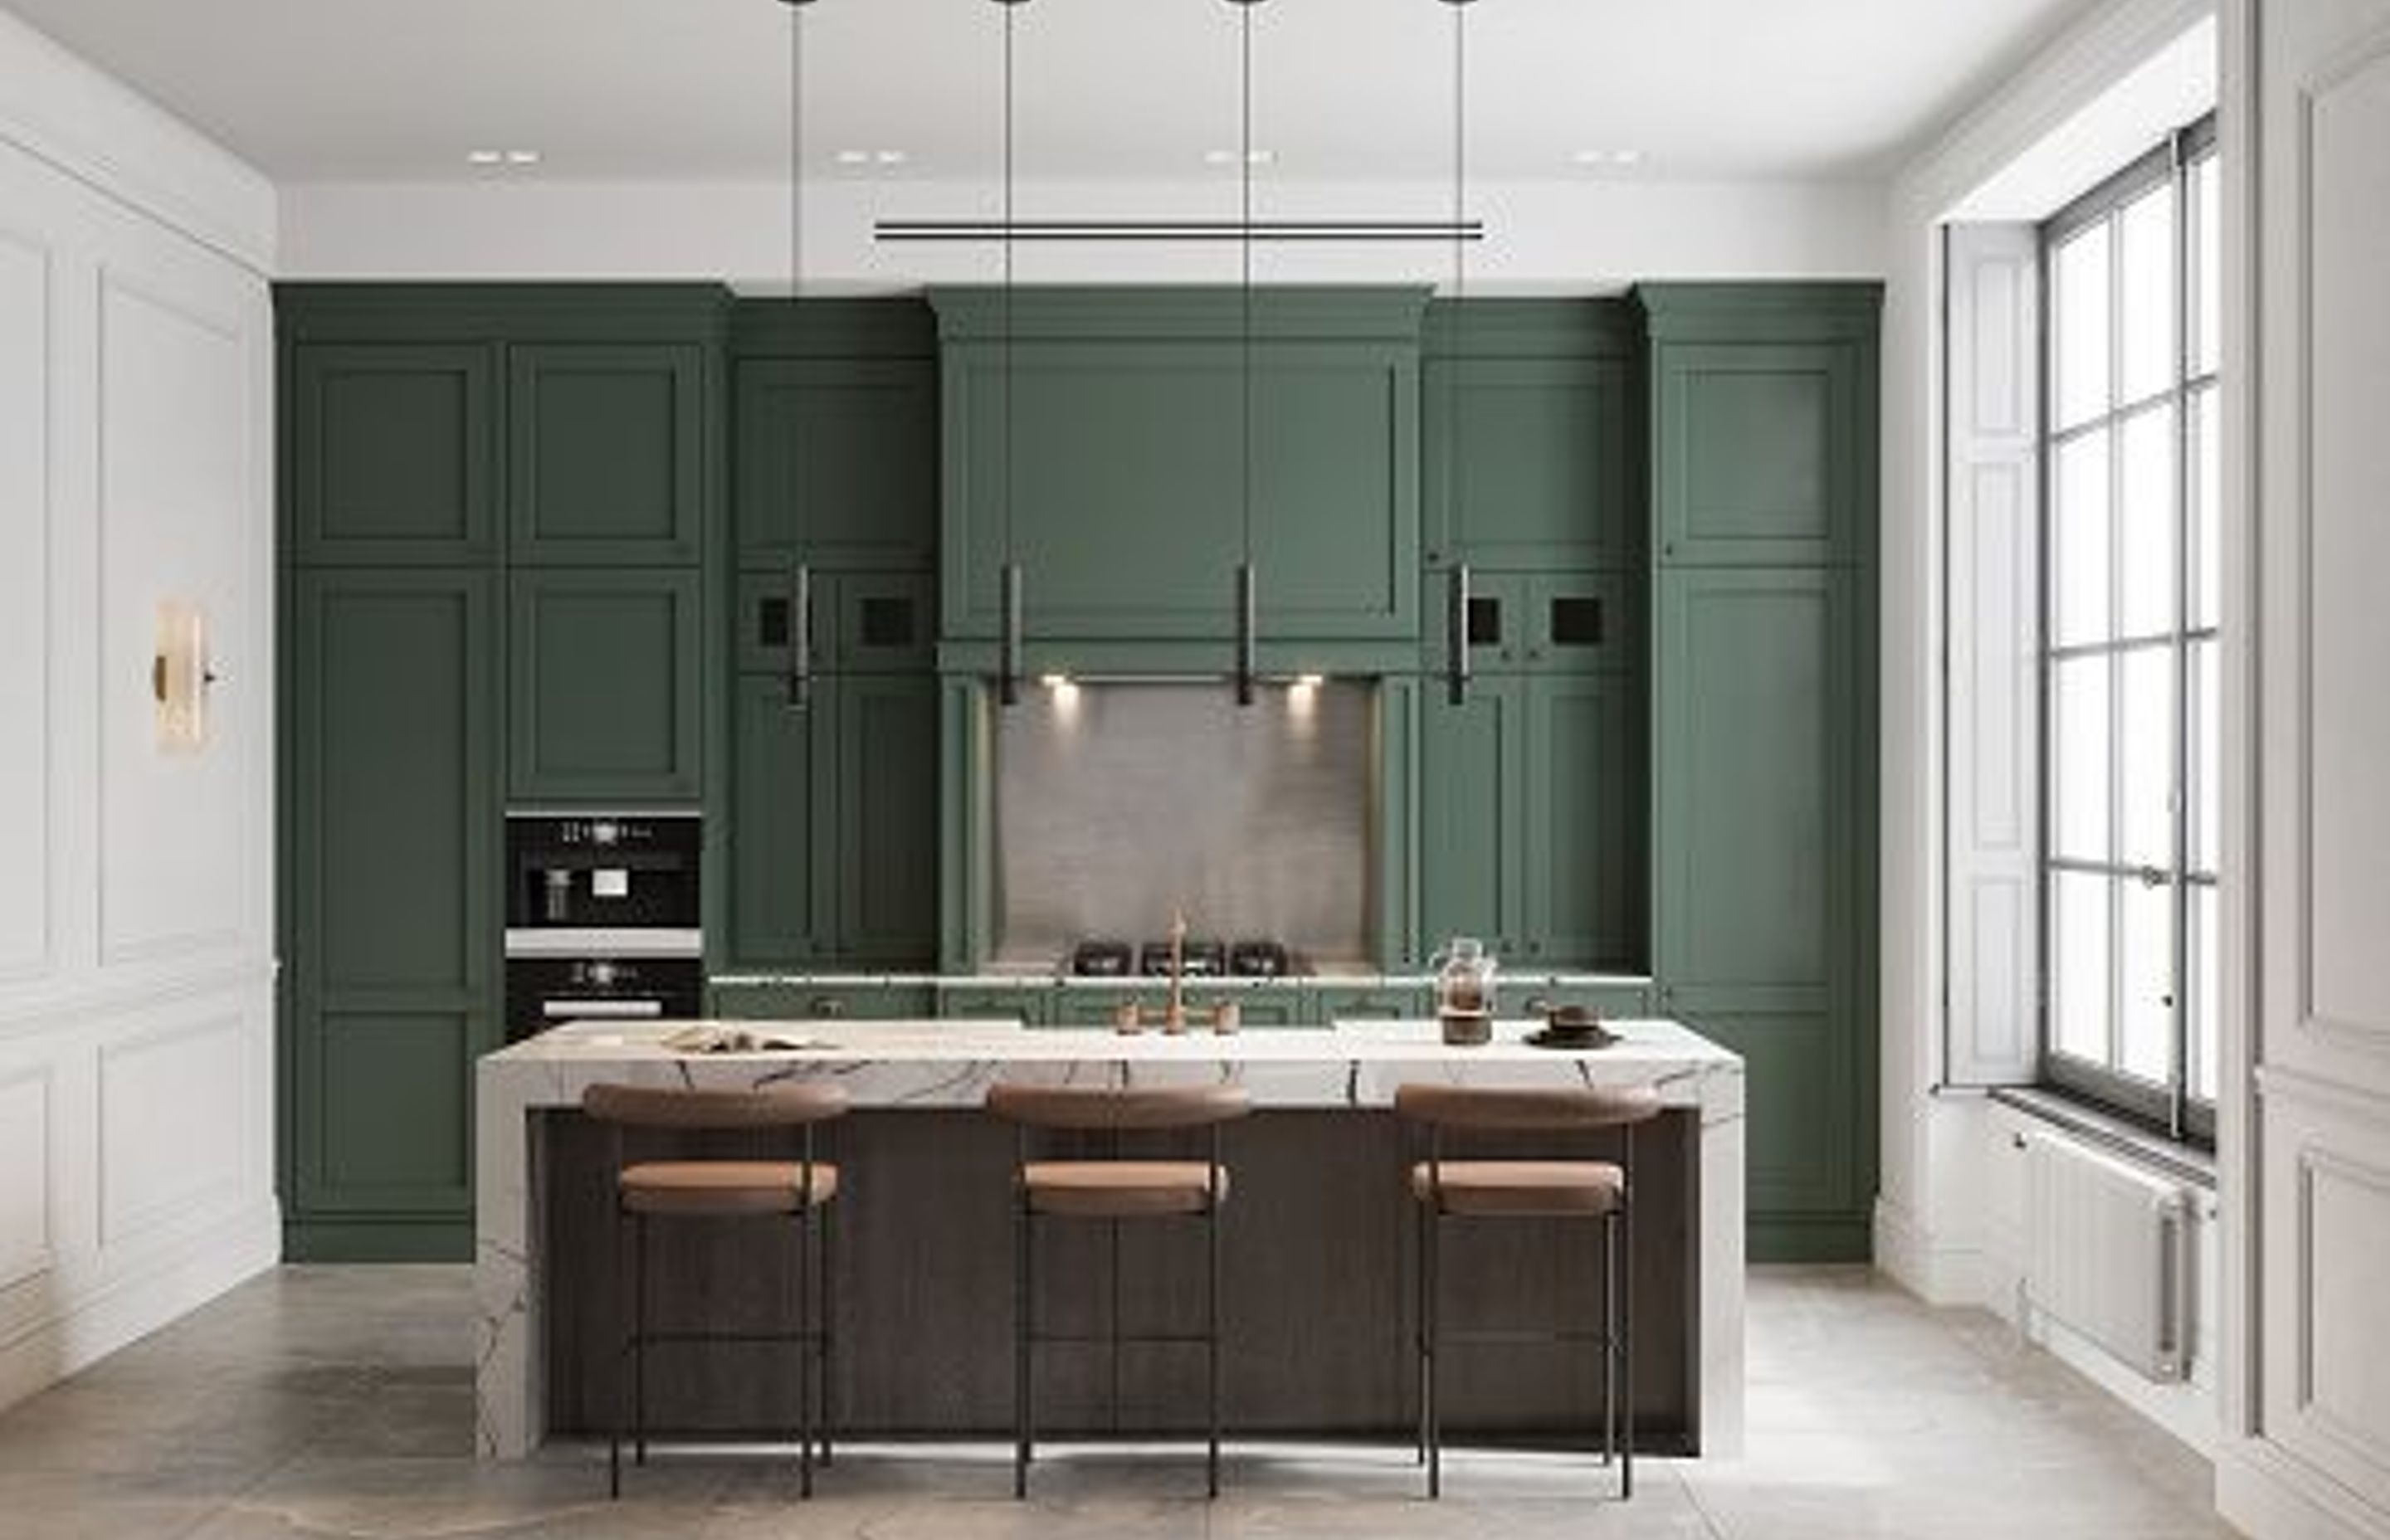 Green Kitchen with Reflective Elements | Photo Credit - iStock